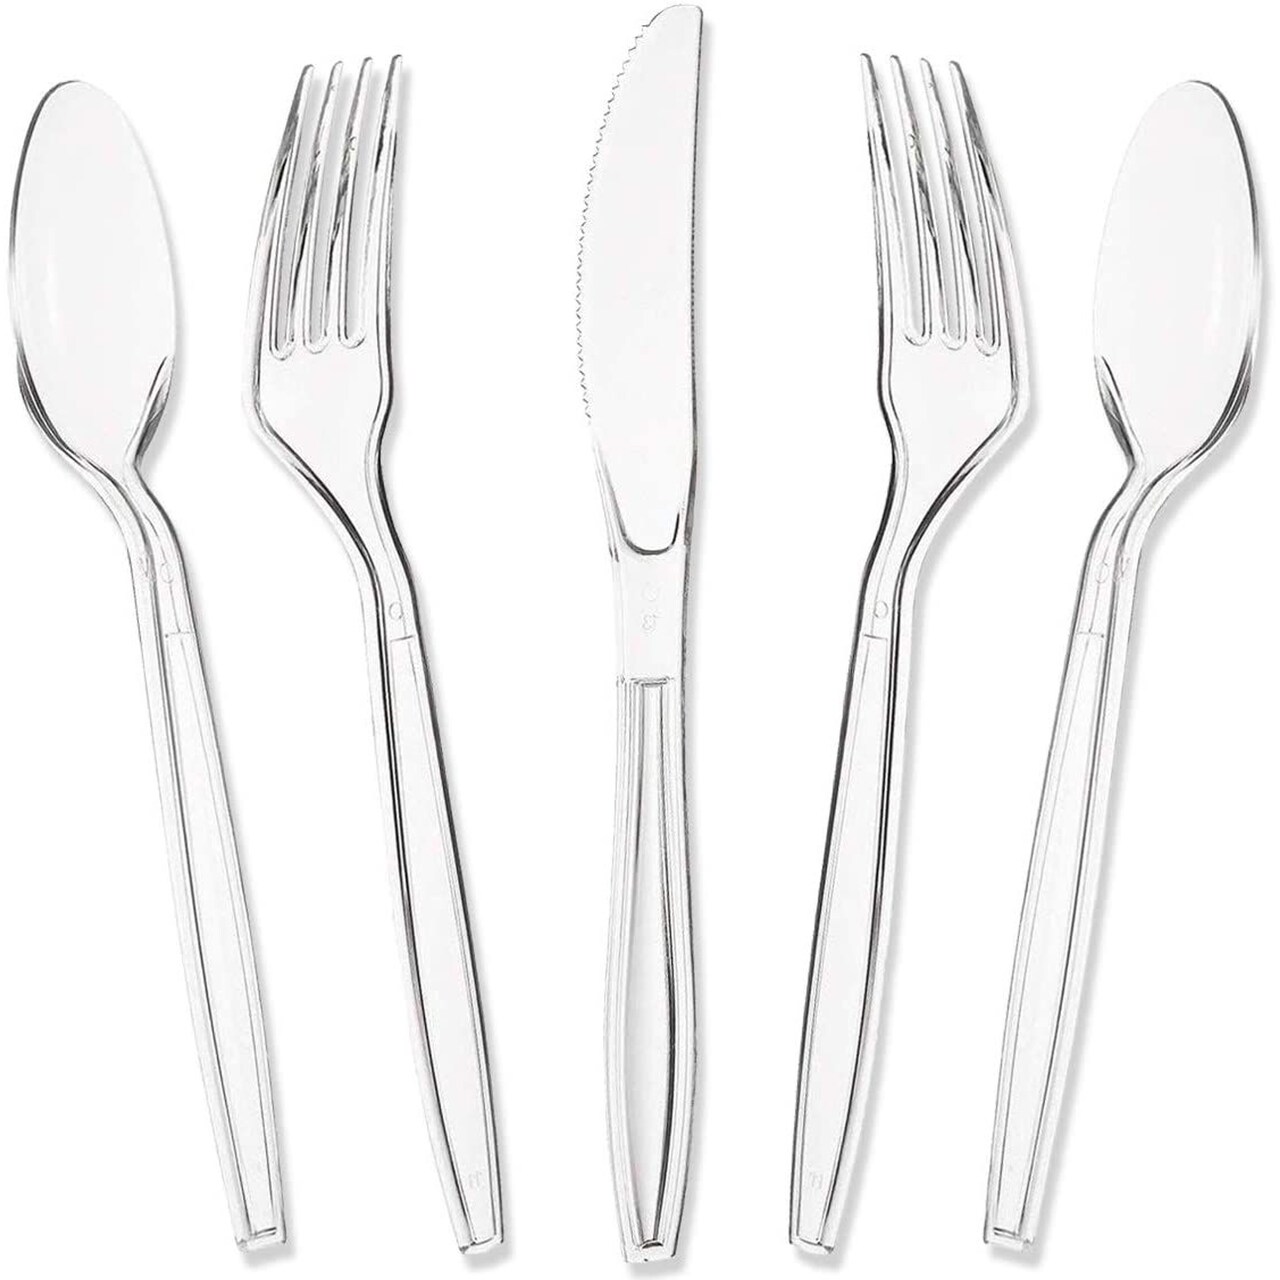 180-Piece Plastic Silverware Set for Party, Disposable Cutlery, Forks, Spoons, Knives